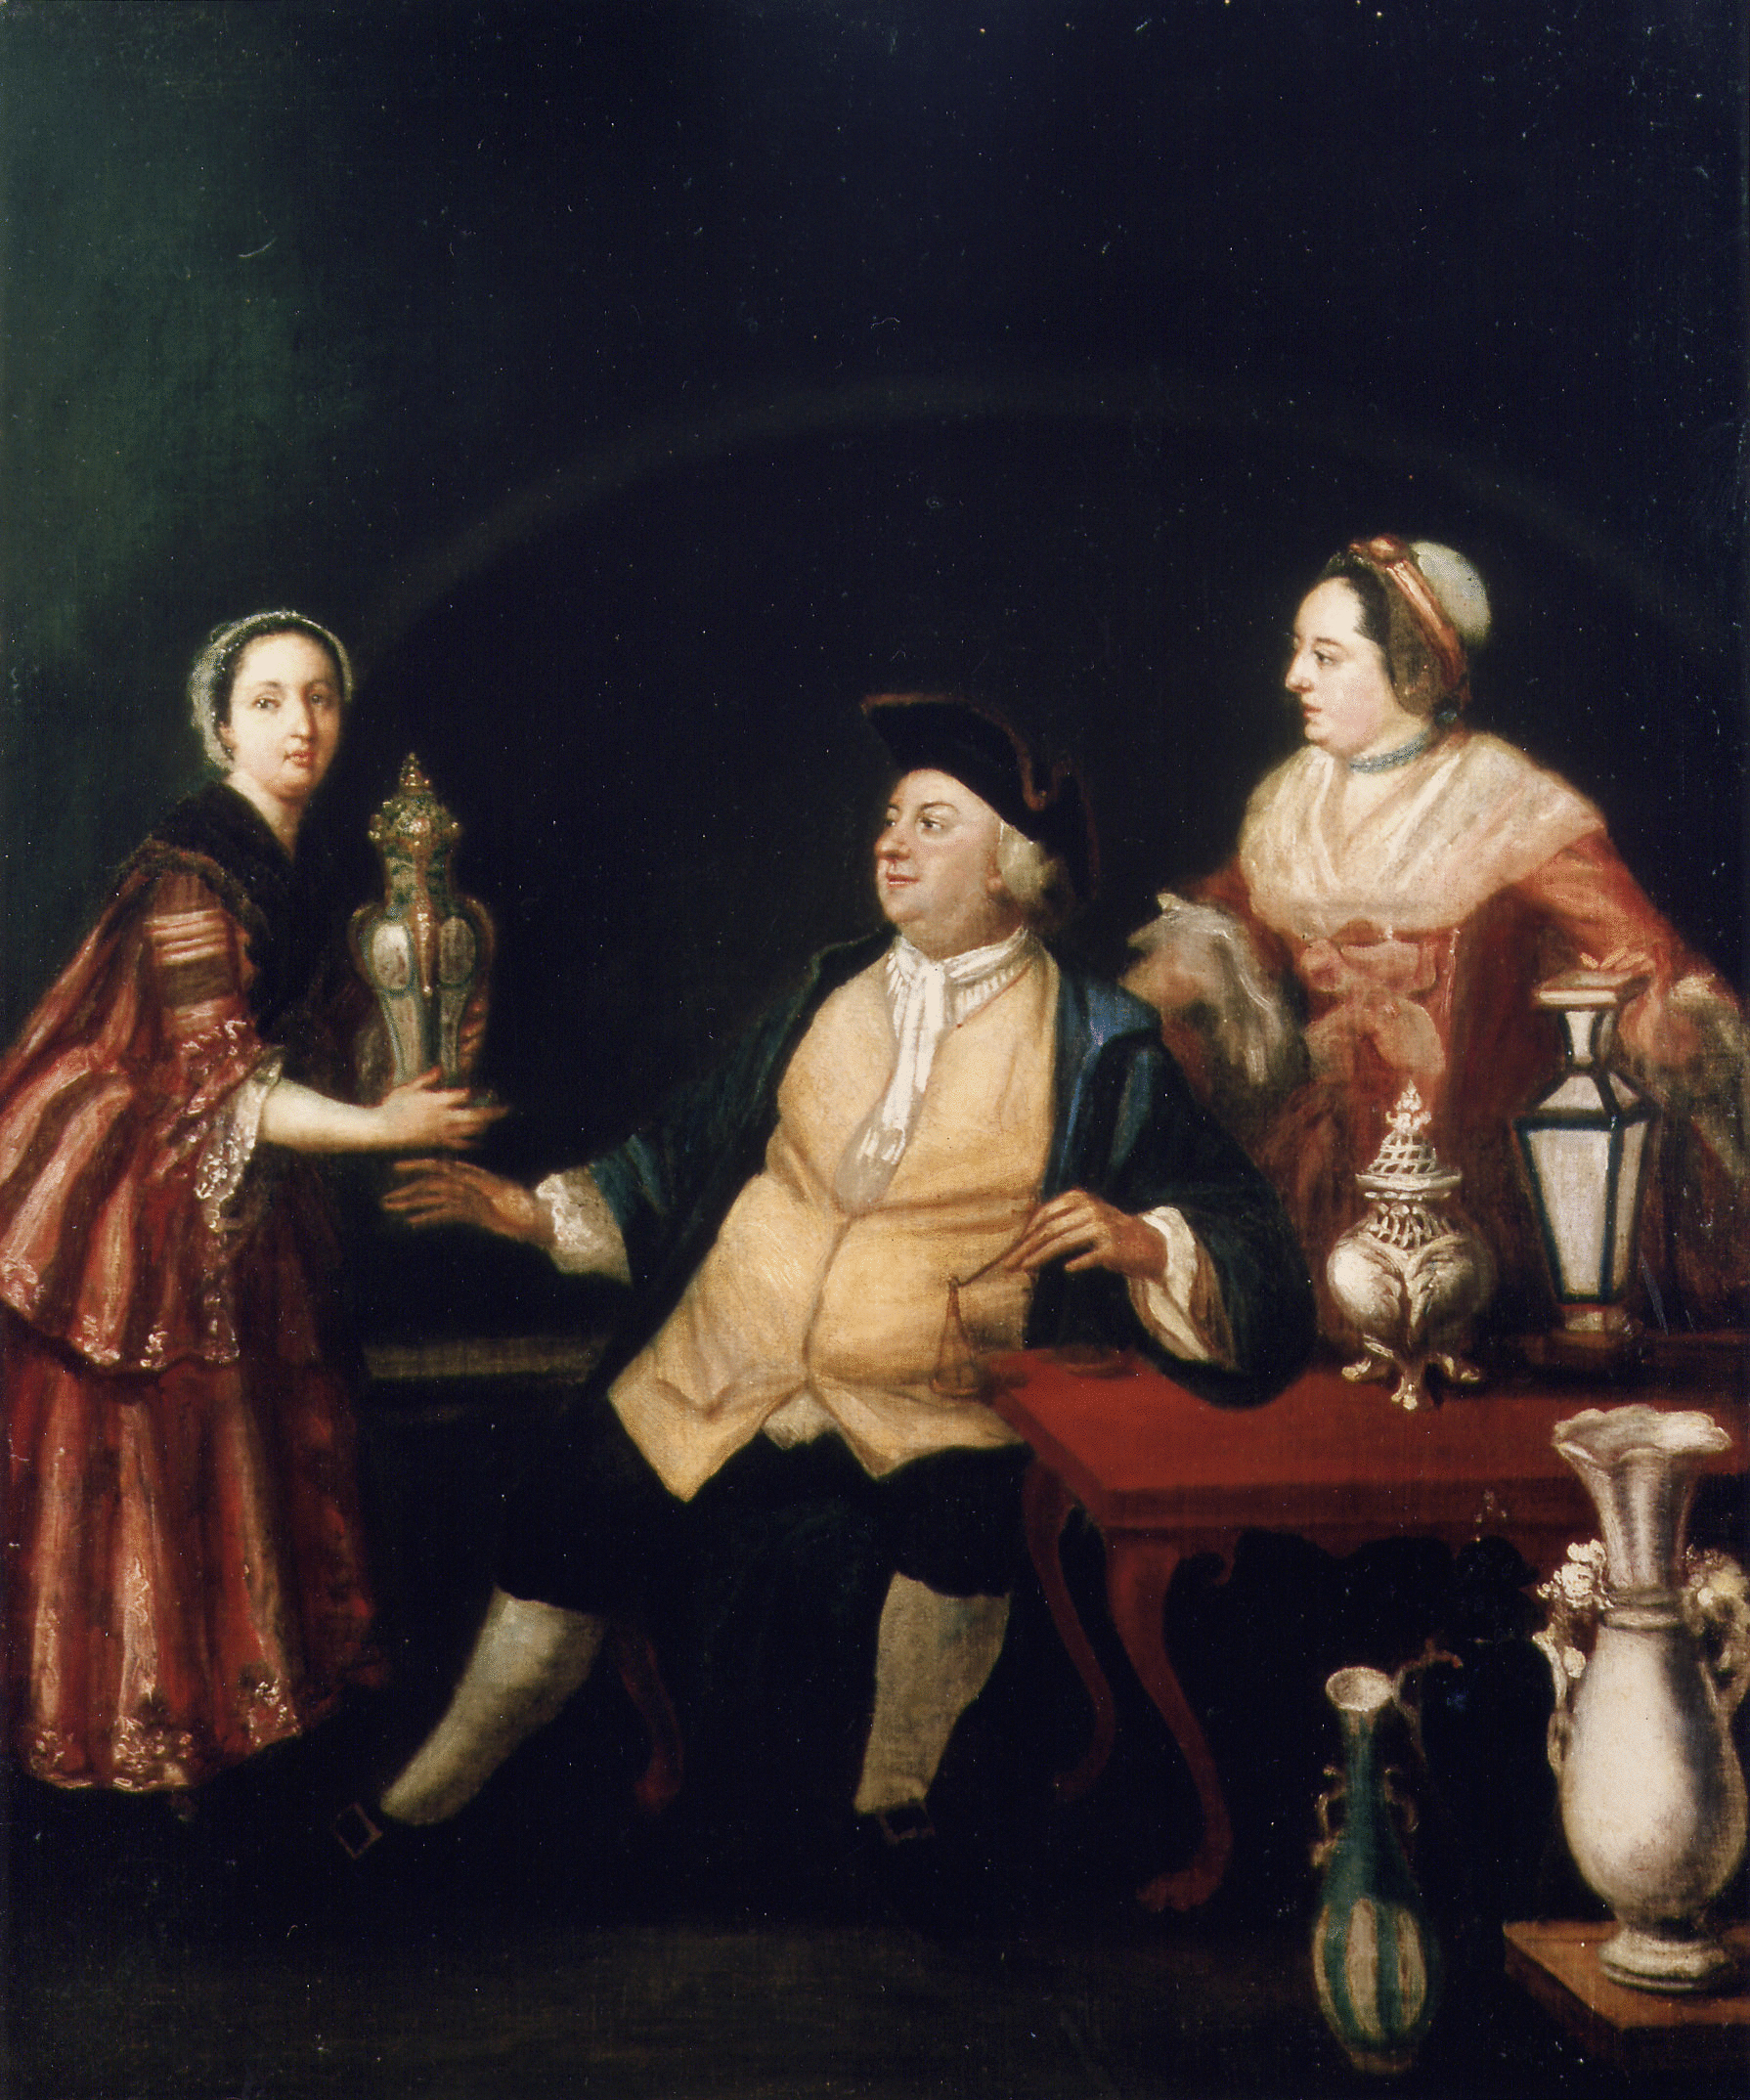 A portrait of Nicholas Sprimont with his wife and sister-in-law